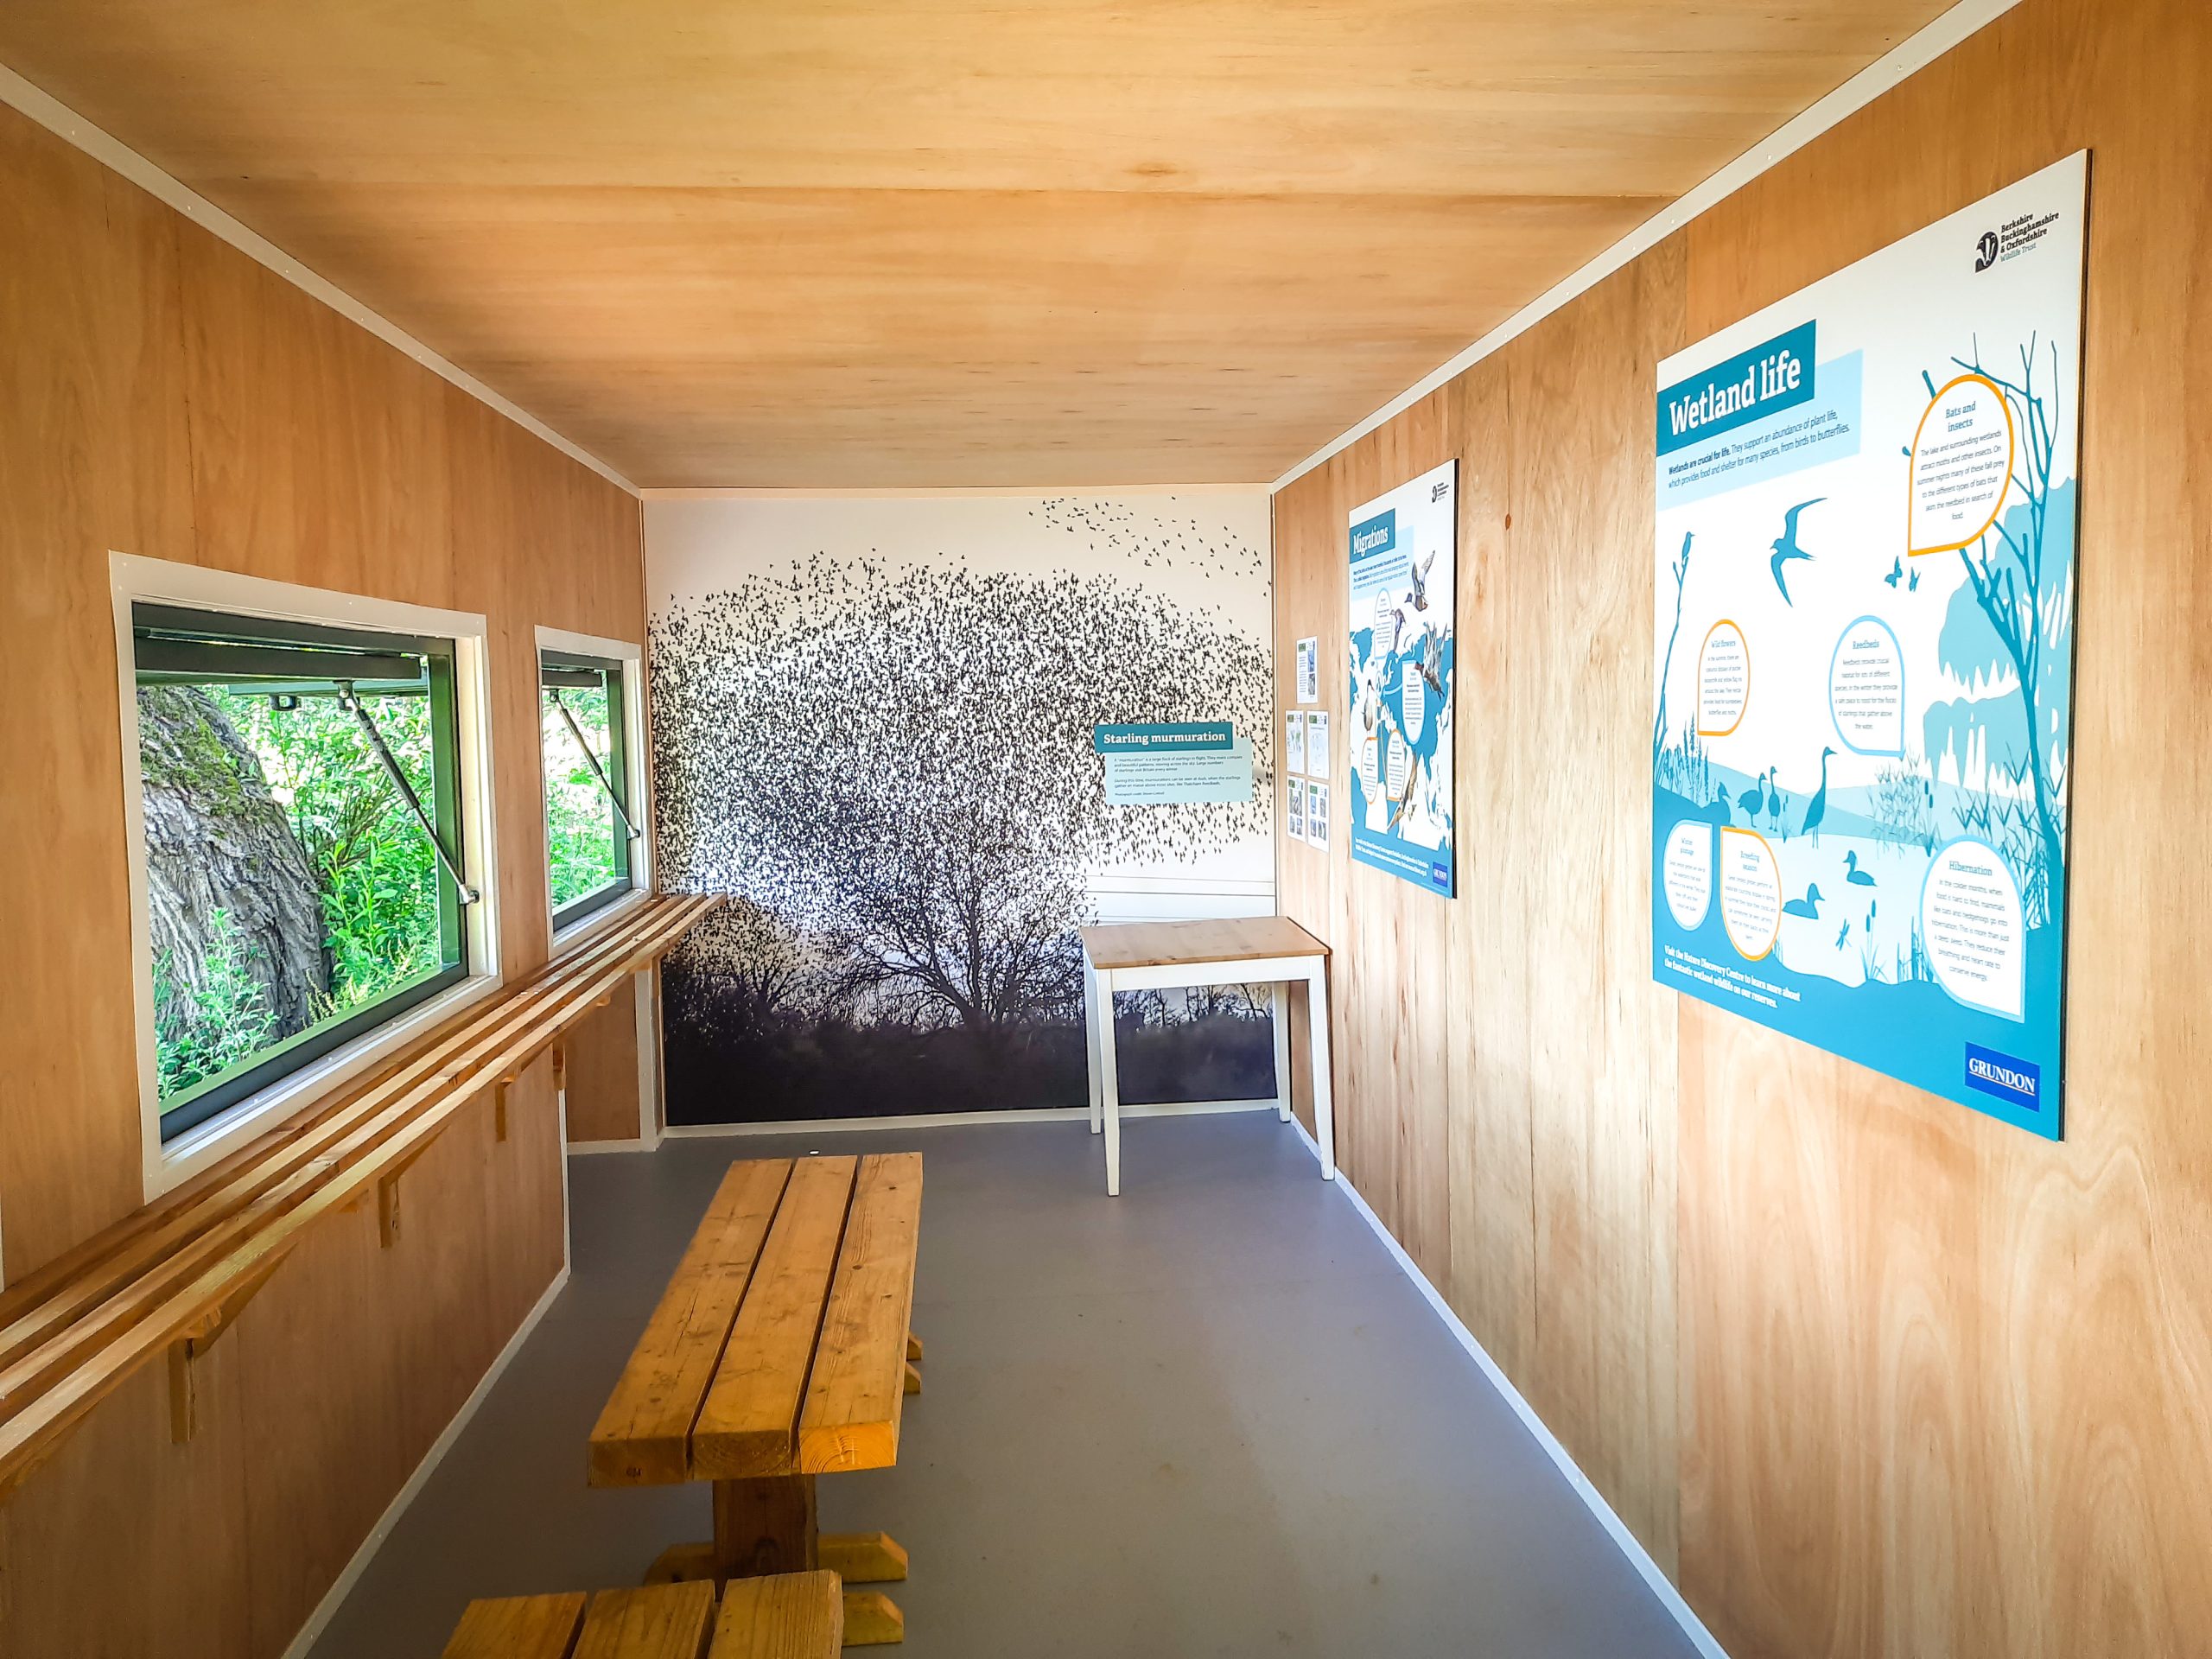 The insides of both hides have been kitted out with comfortable wooden benches and feature artistic interpretation panels on the walls to provide visitors to the Nature Discovery Centre with information about the species that inhabit the reserve.